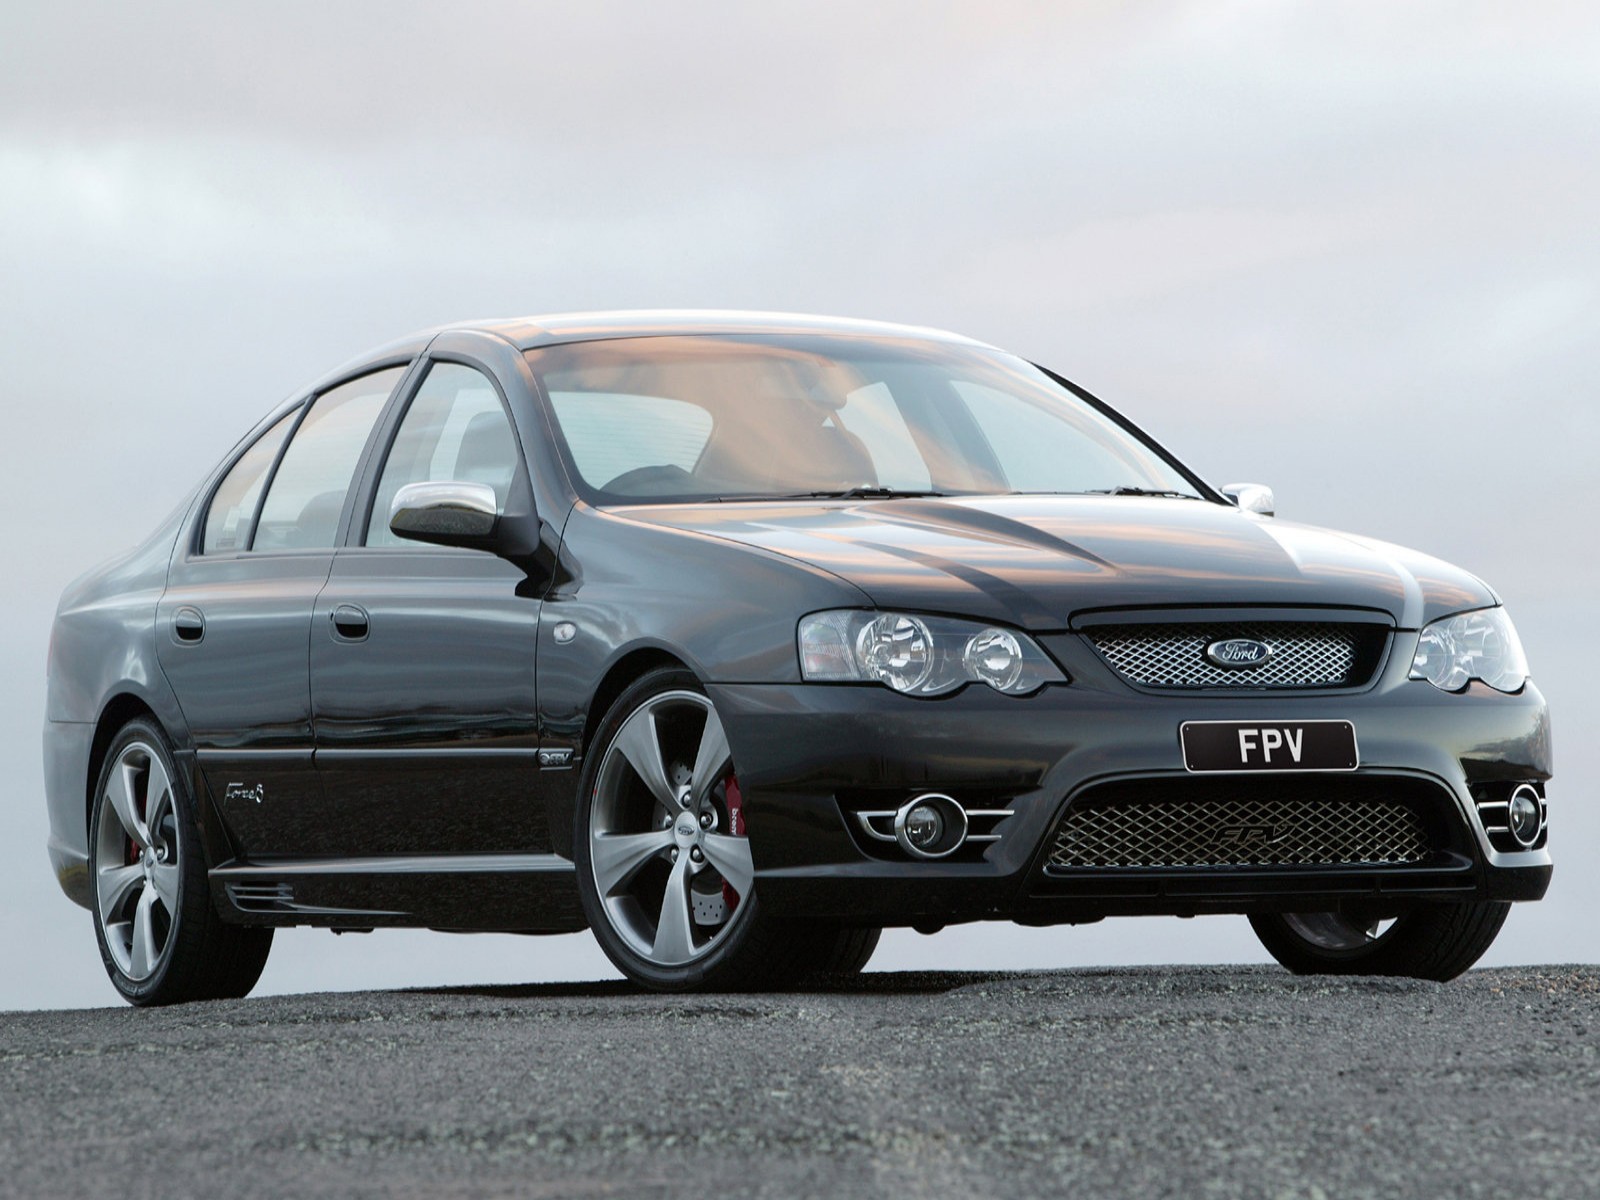 ... car collection: ELEGANT AND LUXURY CAR FPV BF MkII Force 8 (2007